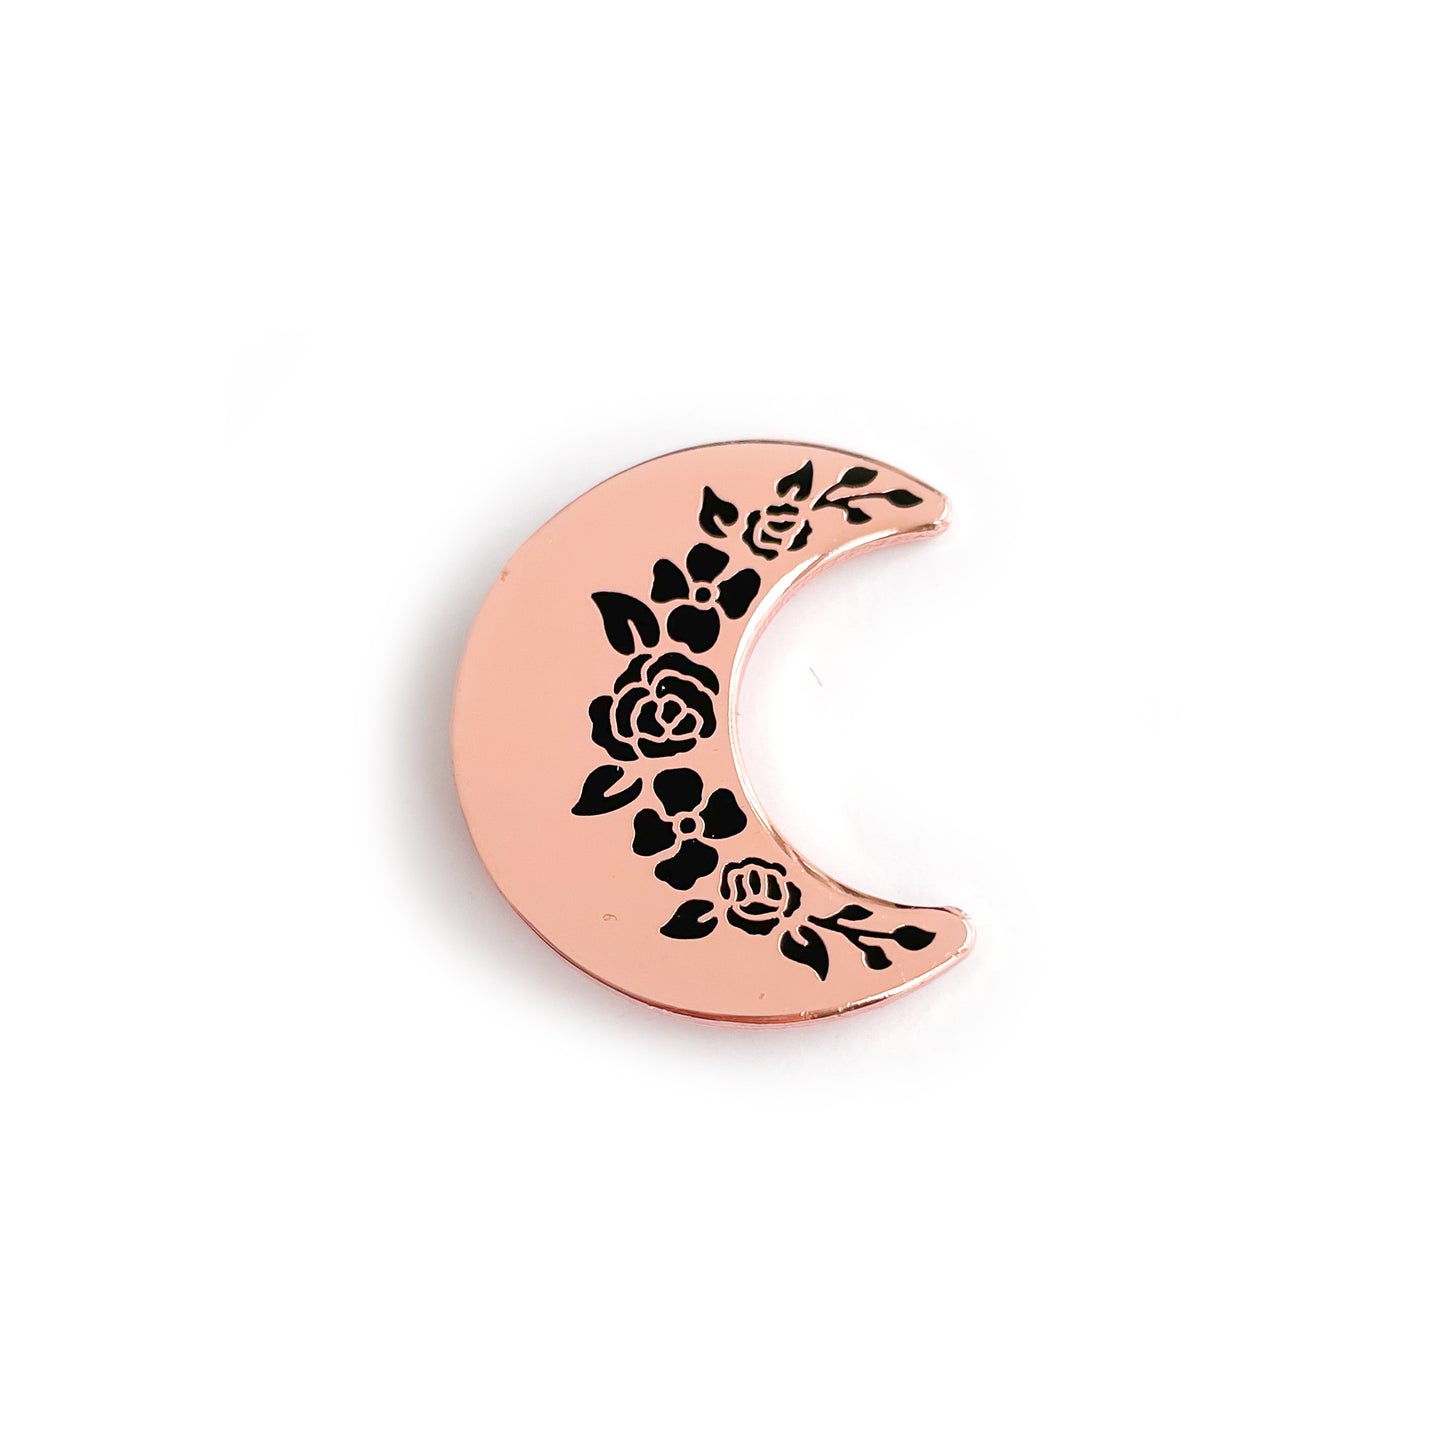 A crescent shaped enamel pin in rose gold metal with black floral shapes along the inside edge.